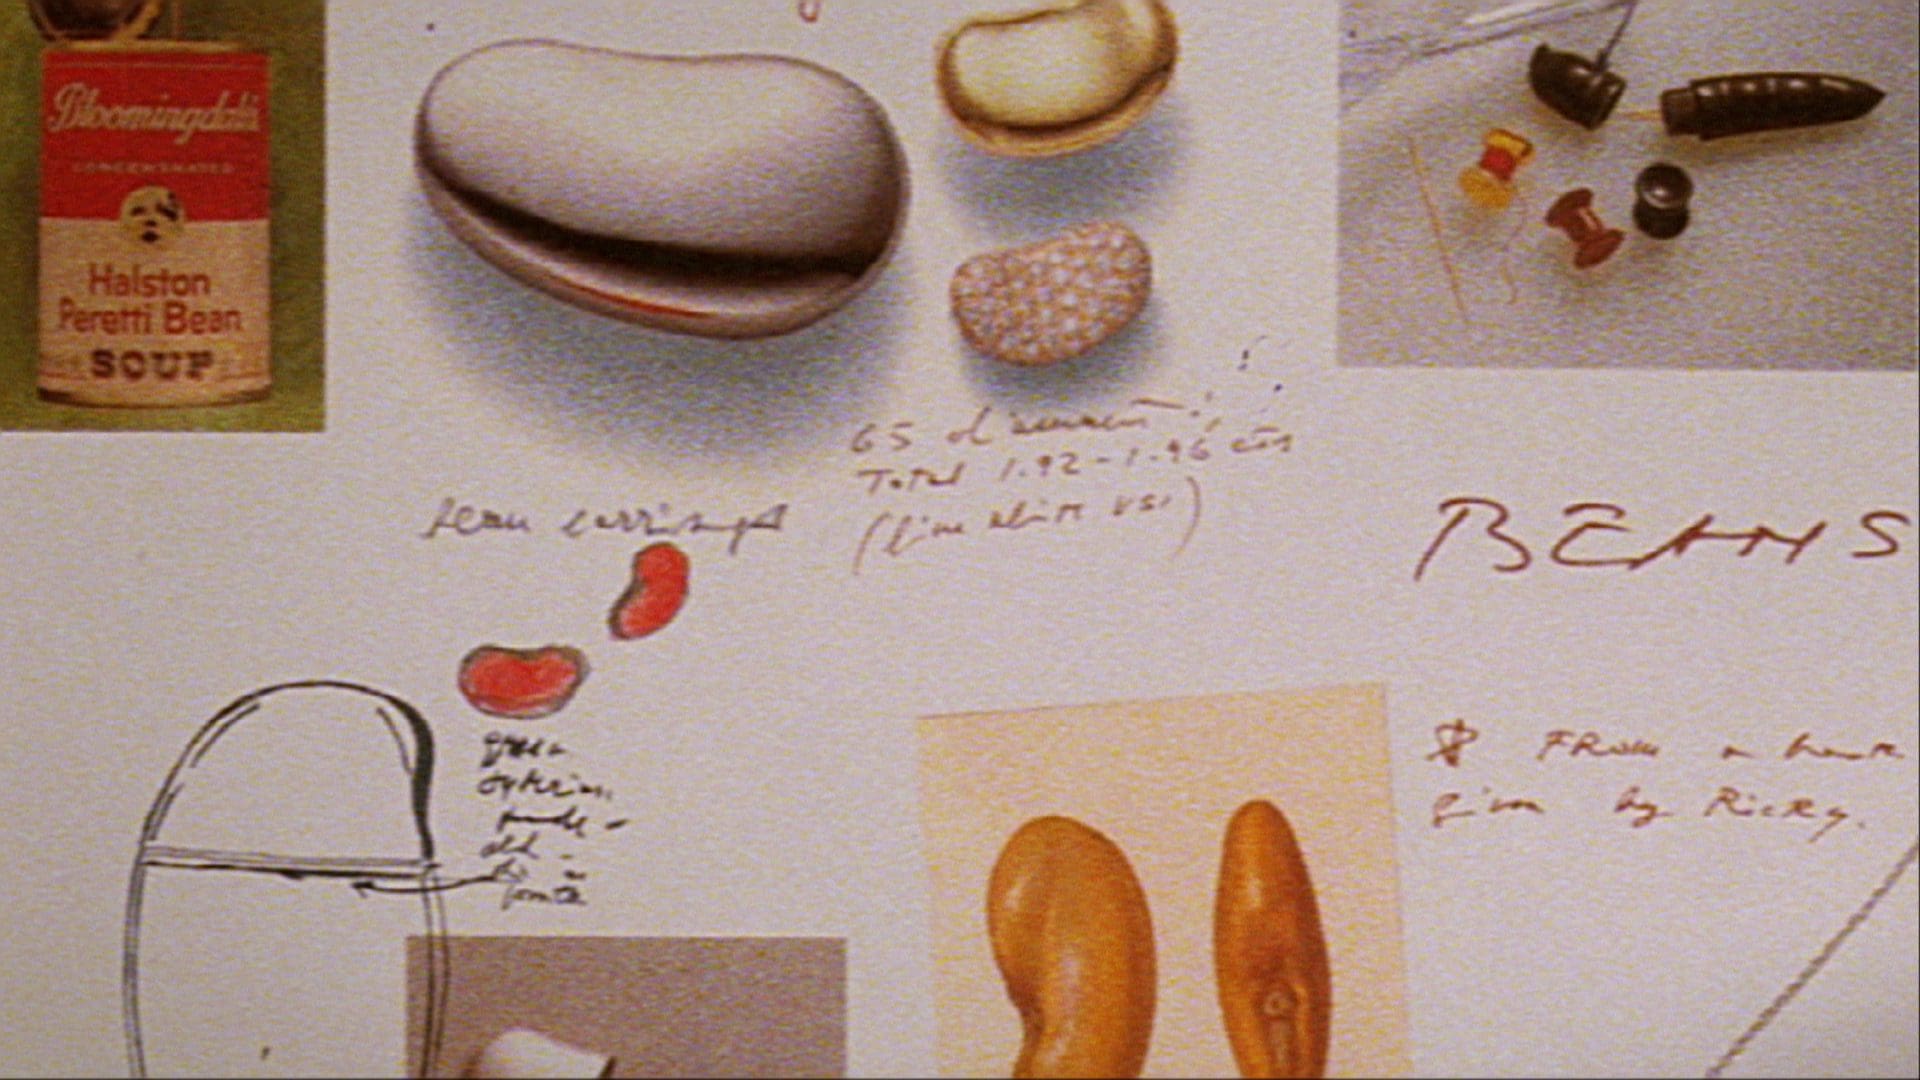 Collage featuring the design process of Elsa Peretti for Tiffany & Co., with sketches, notes, and various bean-shaped prototypes reflecting the creative development of her iconic jewelry pieces.